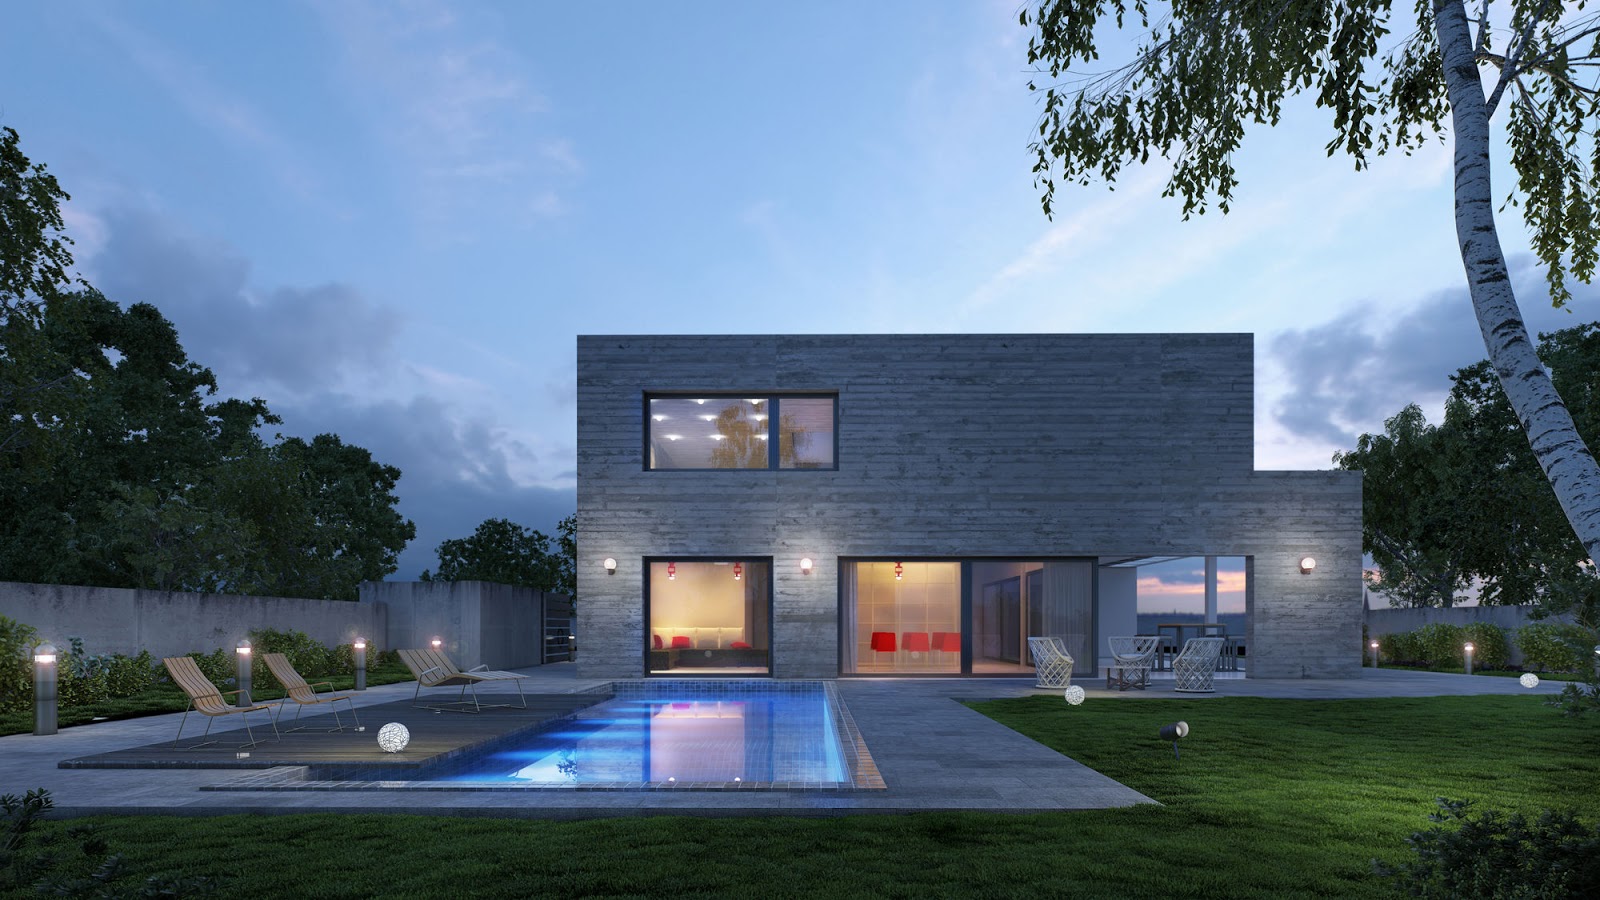 vray 5 3ds max